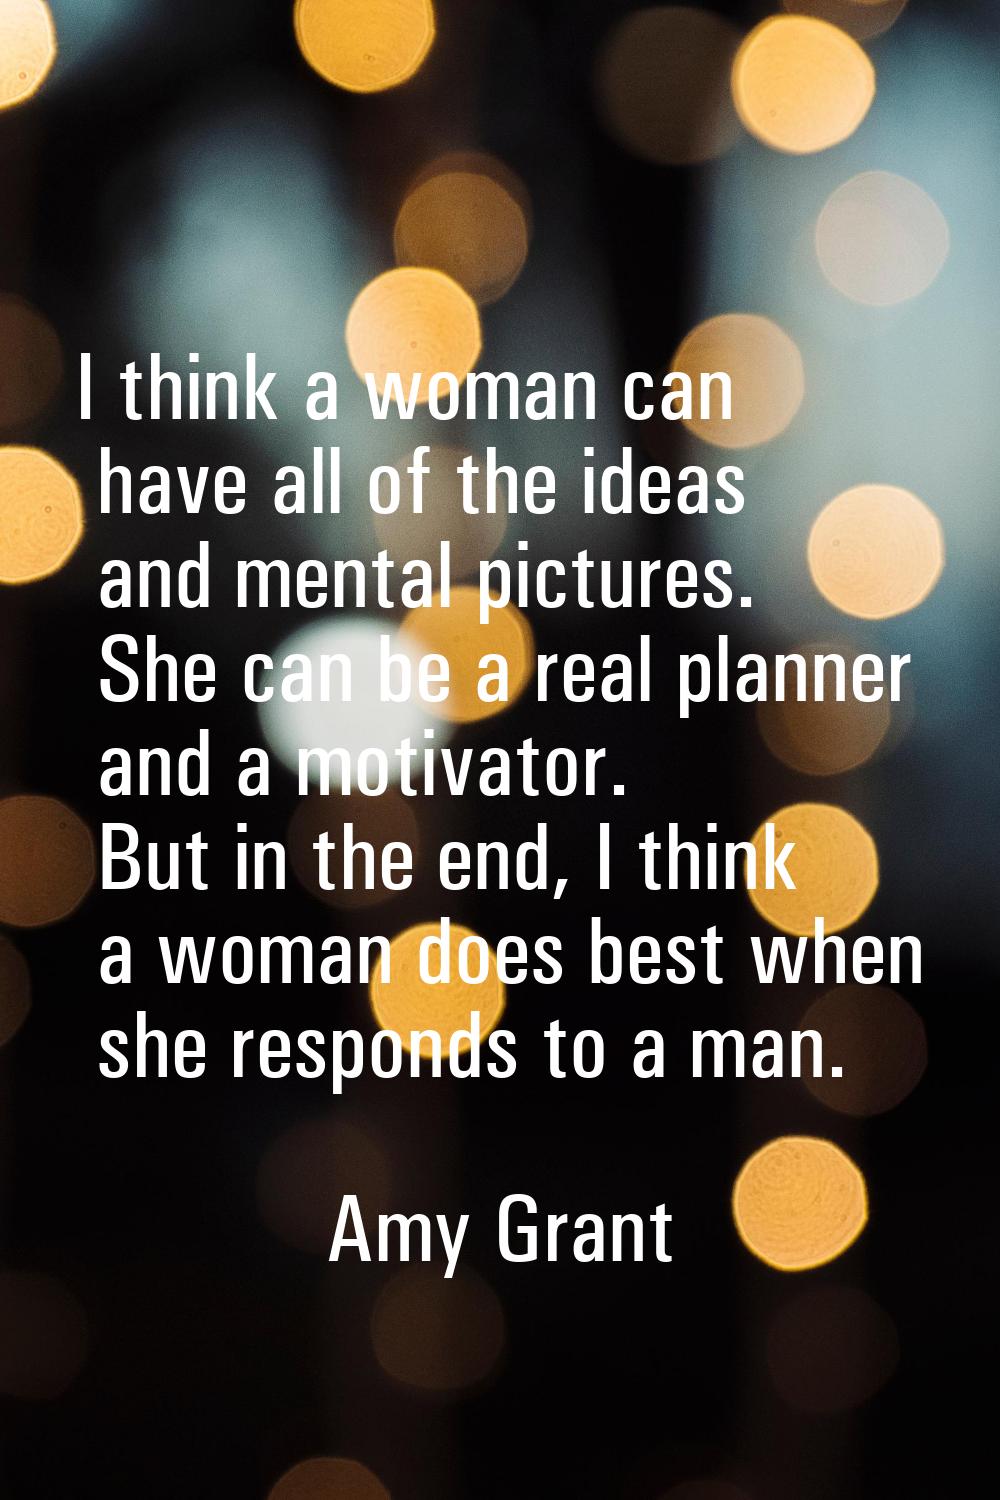 I think a woman can have all of the ideas and mental pictures. She can be a real planner and a moti